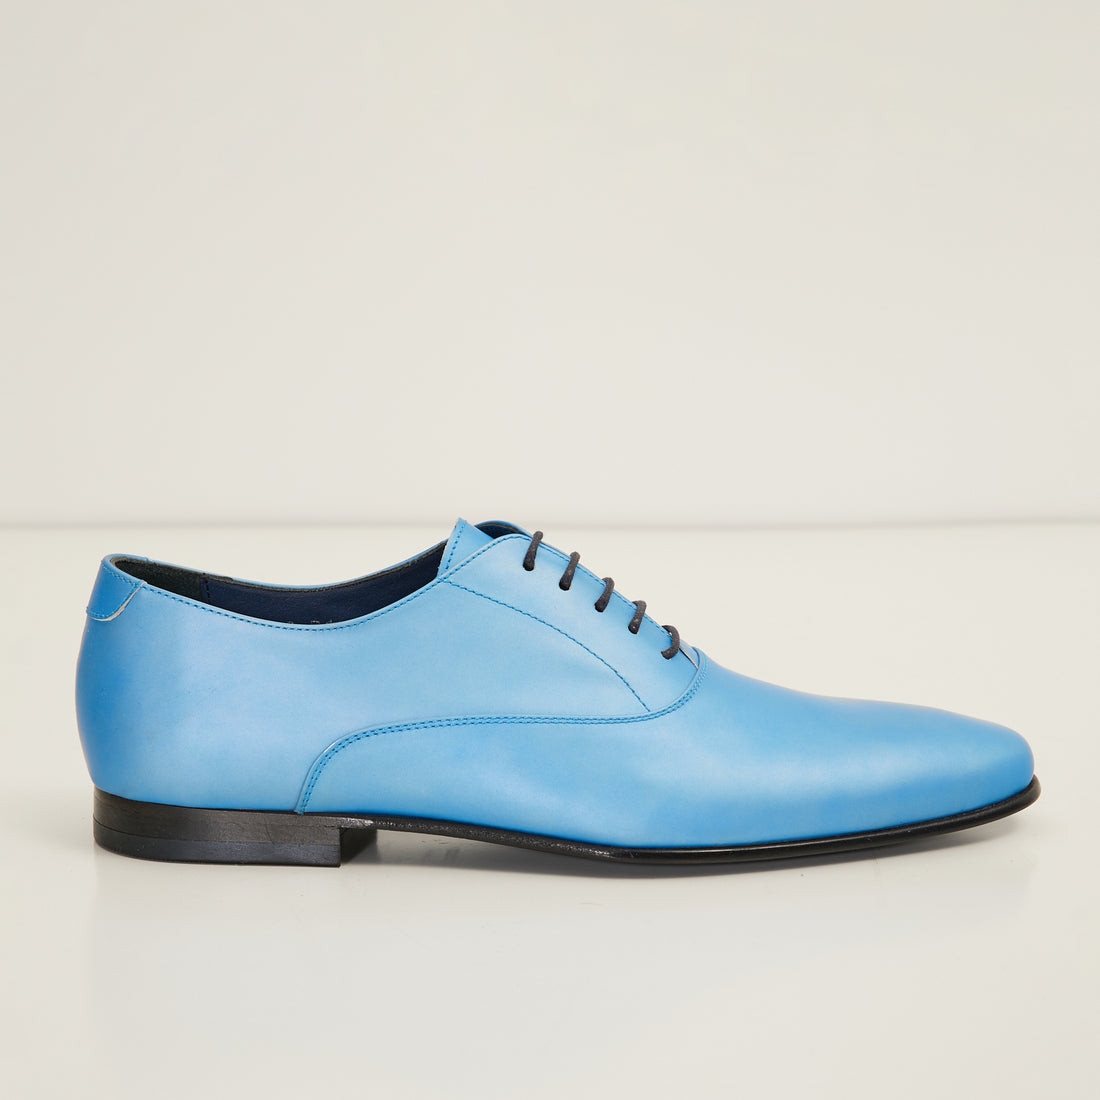 N° D1018 PATENT LEATHER OXFORDS - METALLIC SKY BLUE